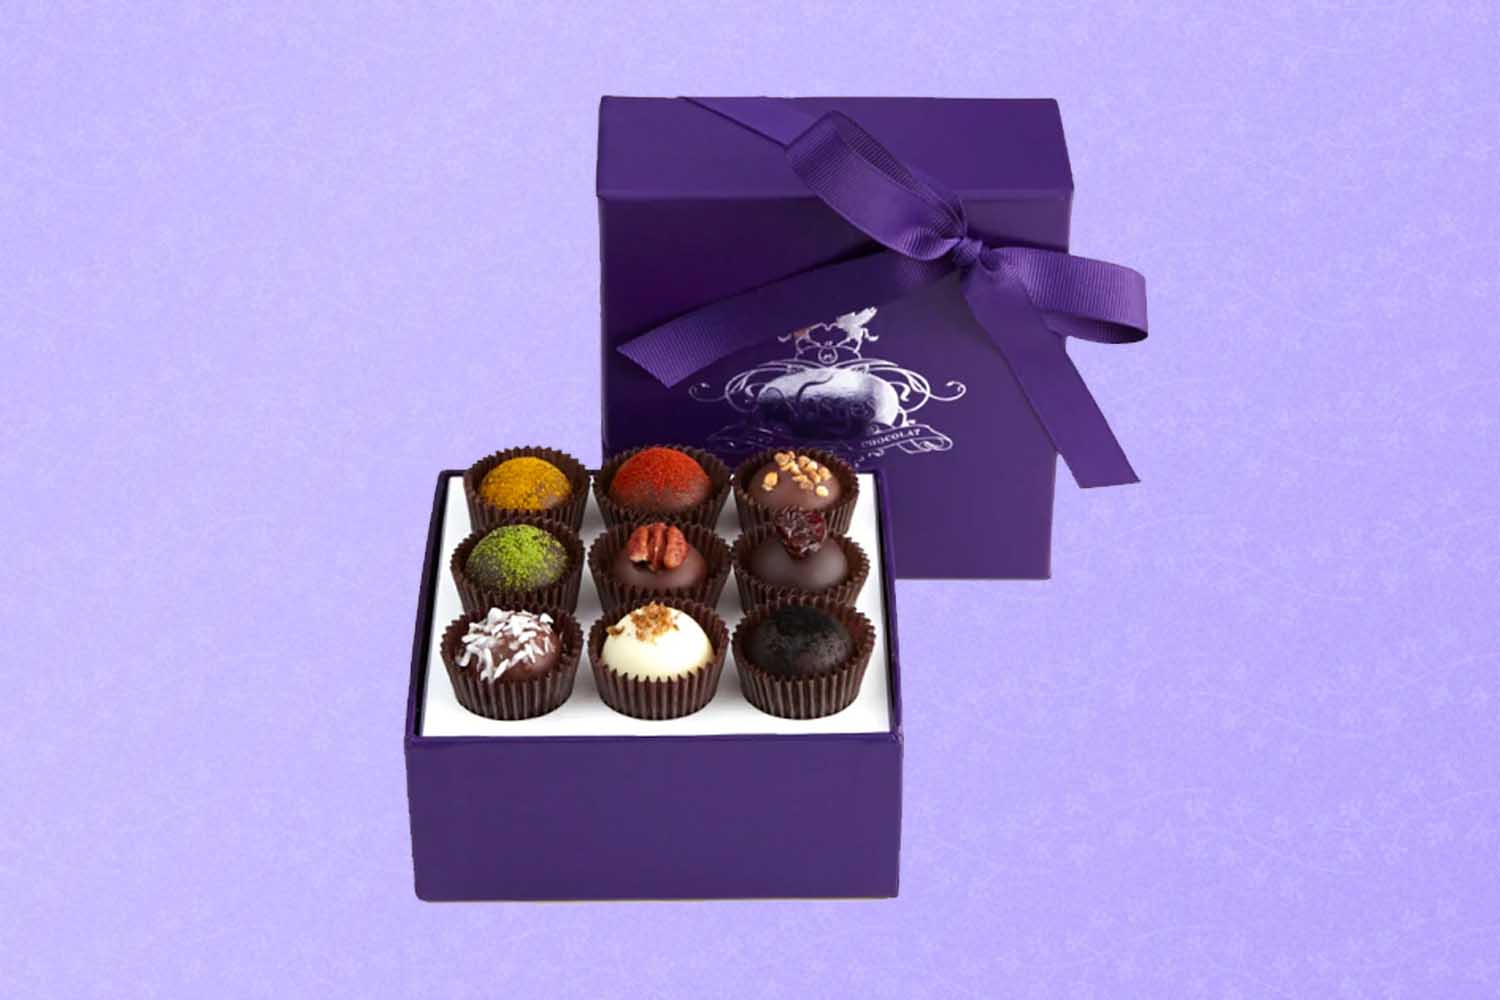 A box of chocolate truffles, a perfect Mother's Day gift for 2022, on a purple background.